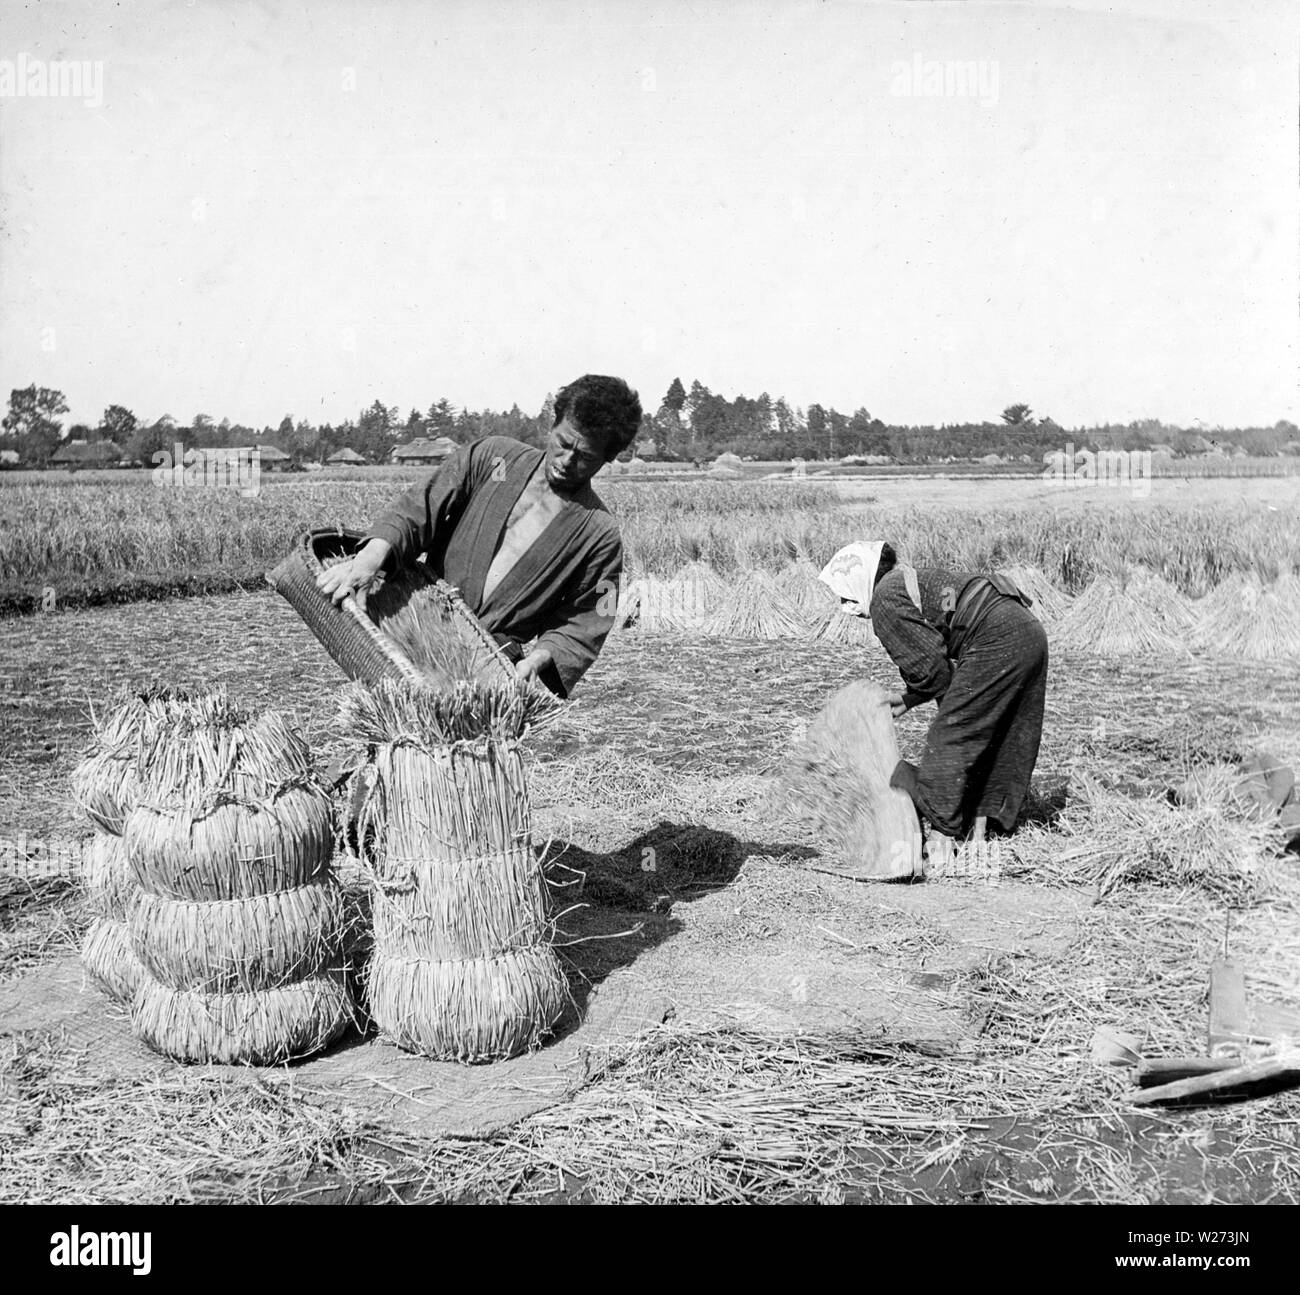 [ 1900s Japan - Japanese Farmers Packing Rice ] —   A Japanese farmer in a rice field is packing rice in straw bags. Early 1900s.  20th century vintage glass slide. Stock Photo